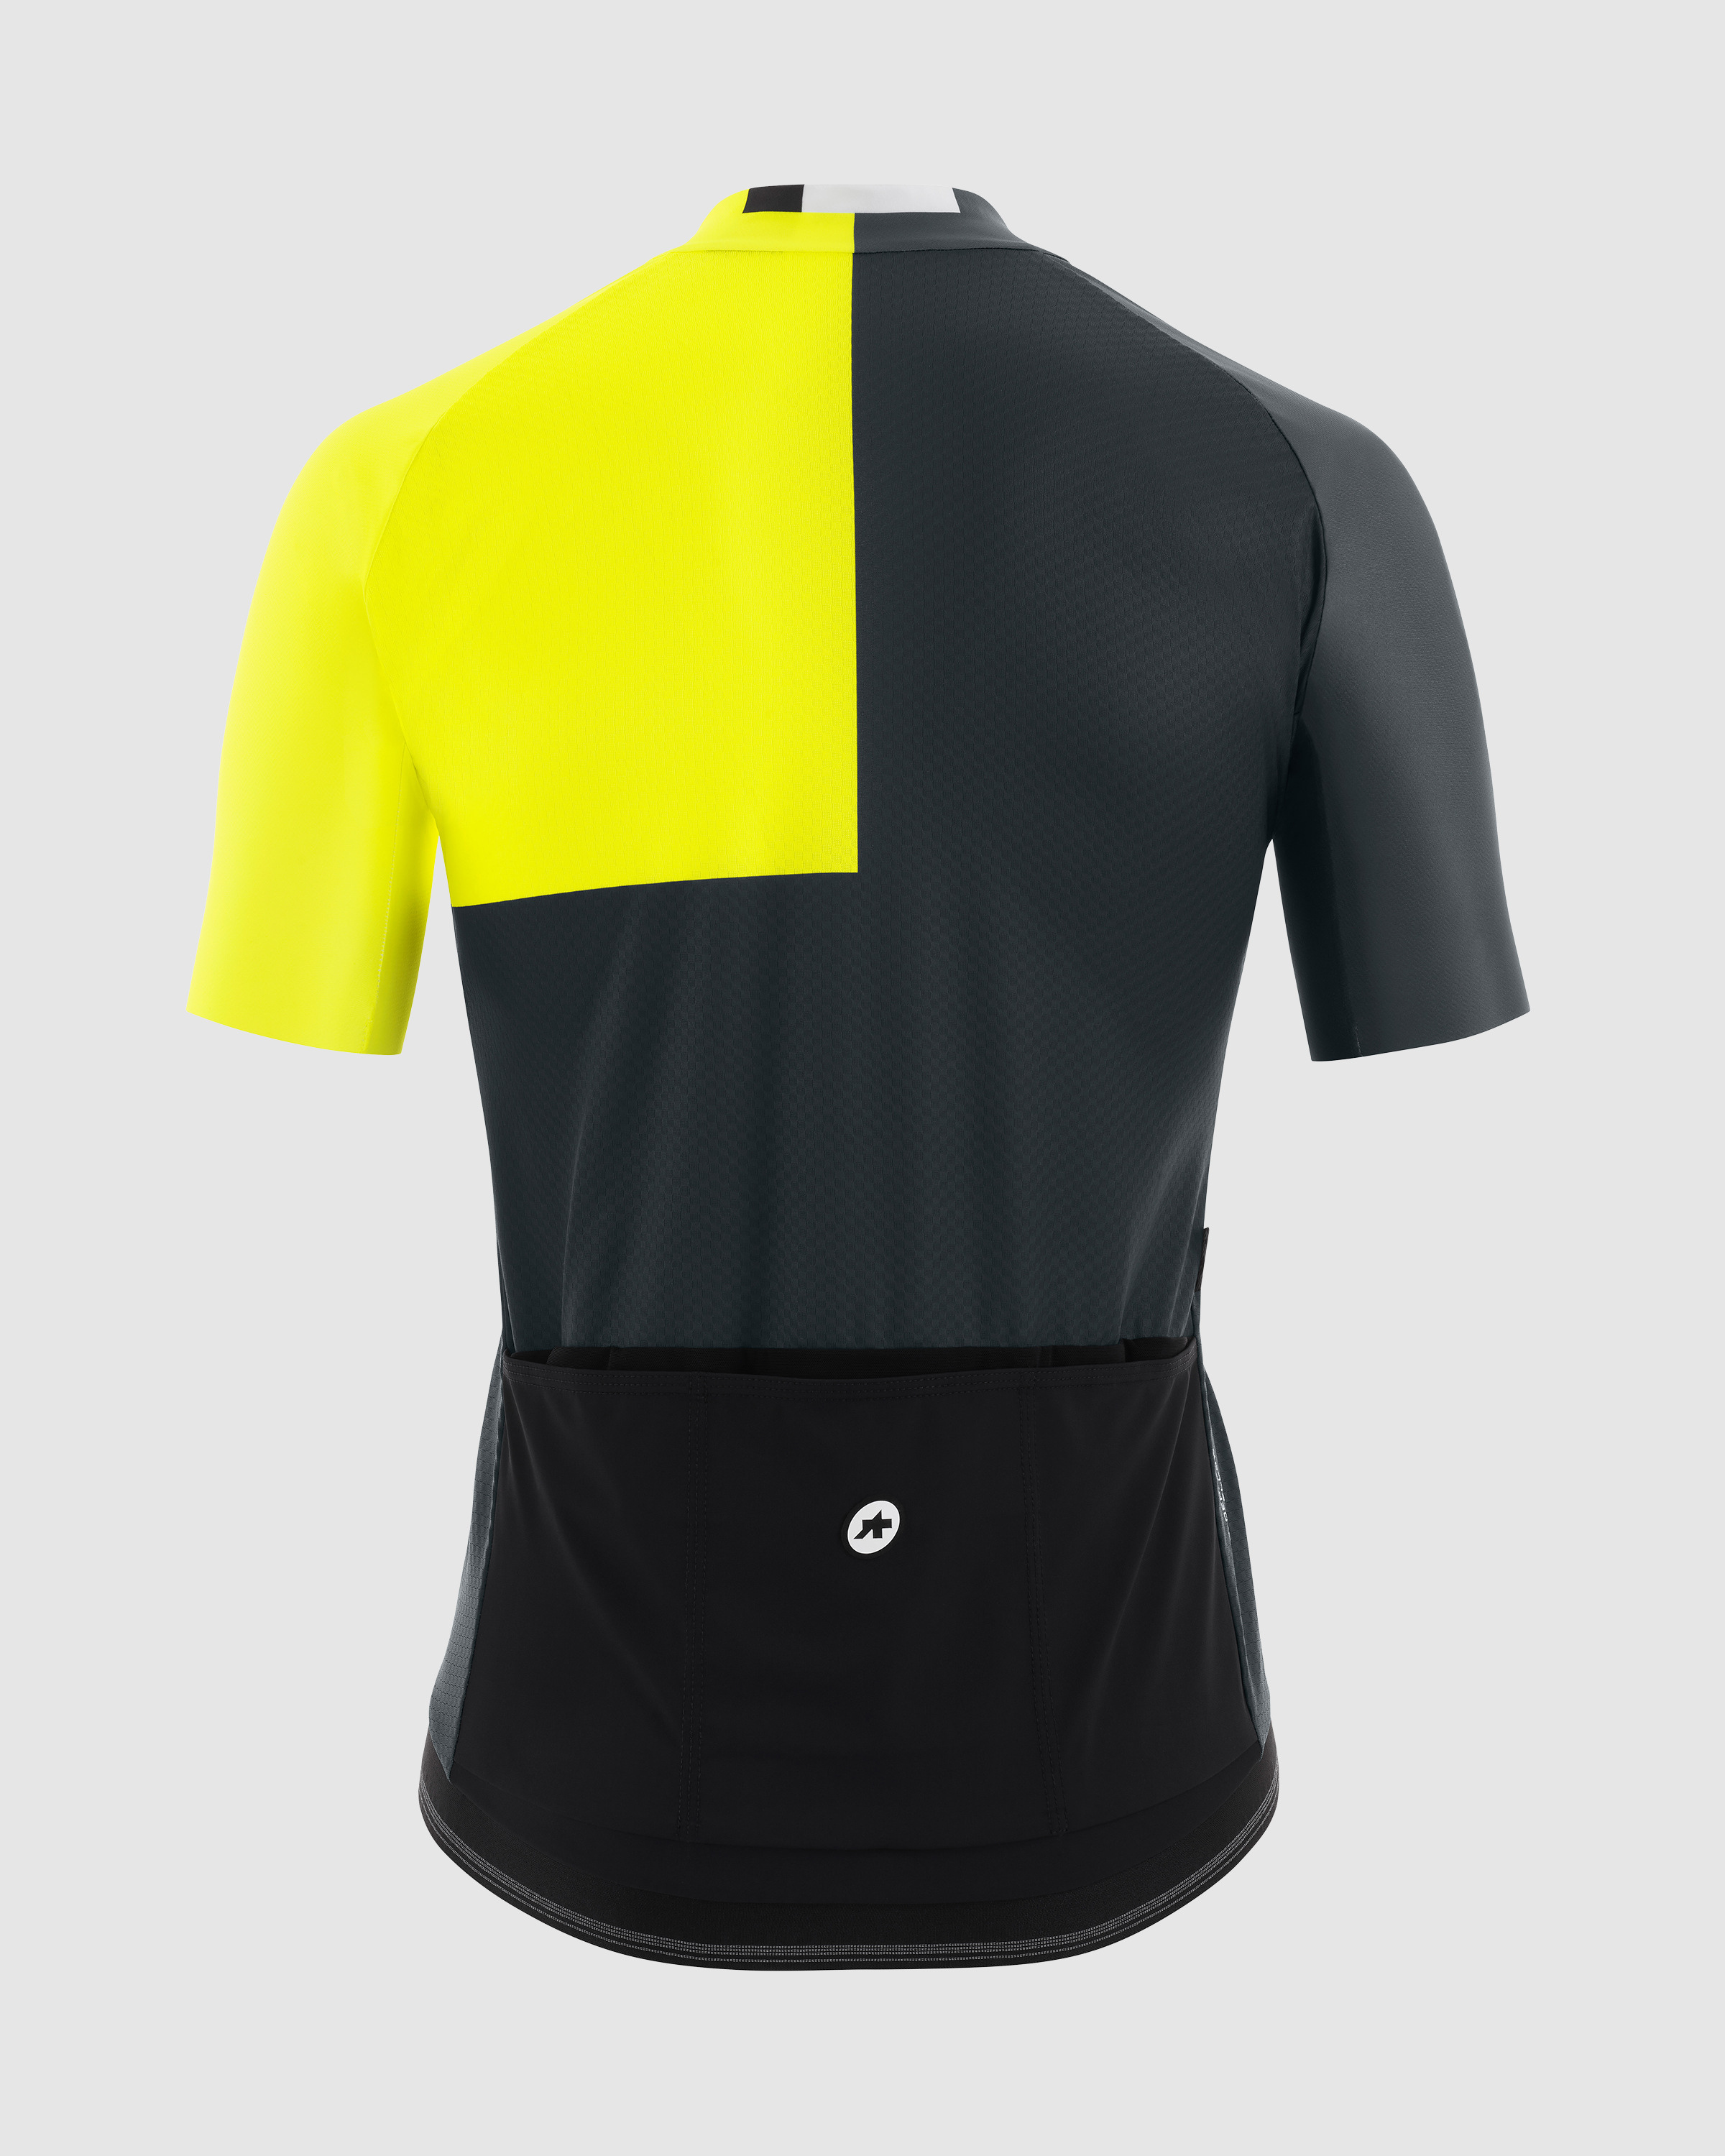 MILLE GT Jersey C2 EVO Stahlstern - ASSOS Of Switzerland - Official Outlet